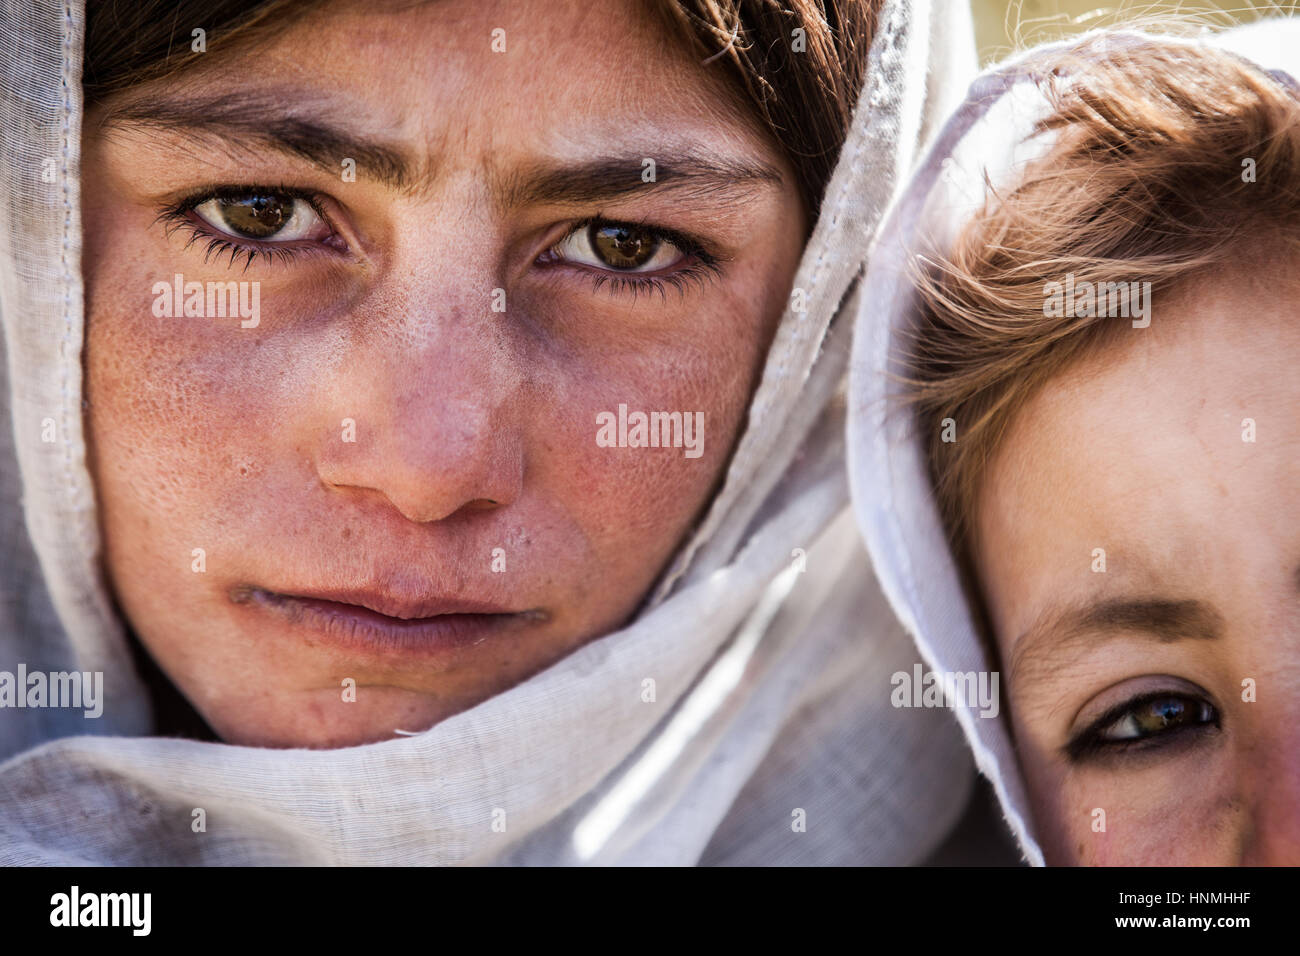 Afghanistan, Wakhan corridor a portrait of two poor and 